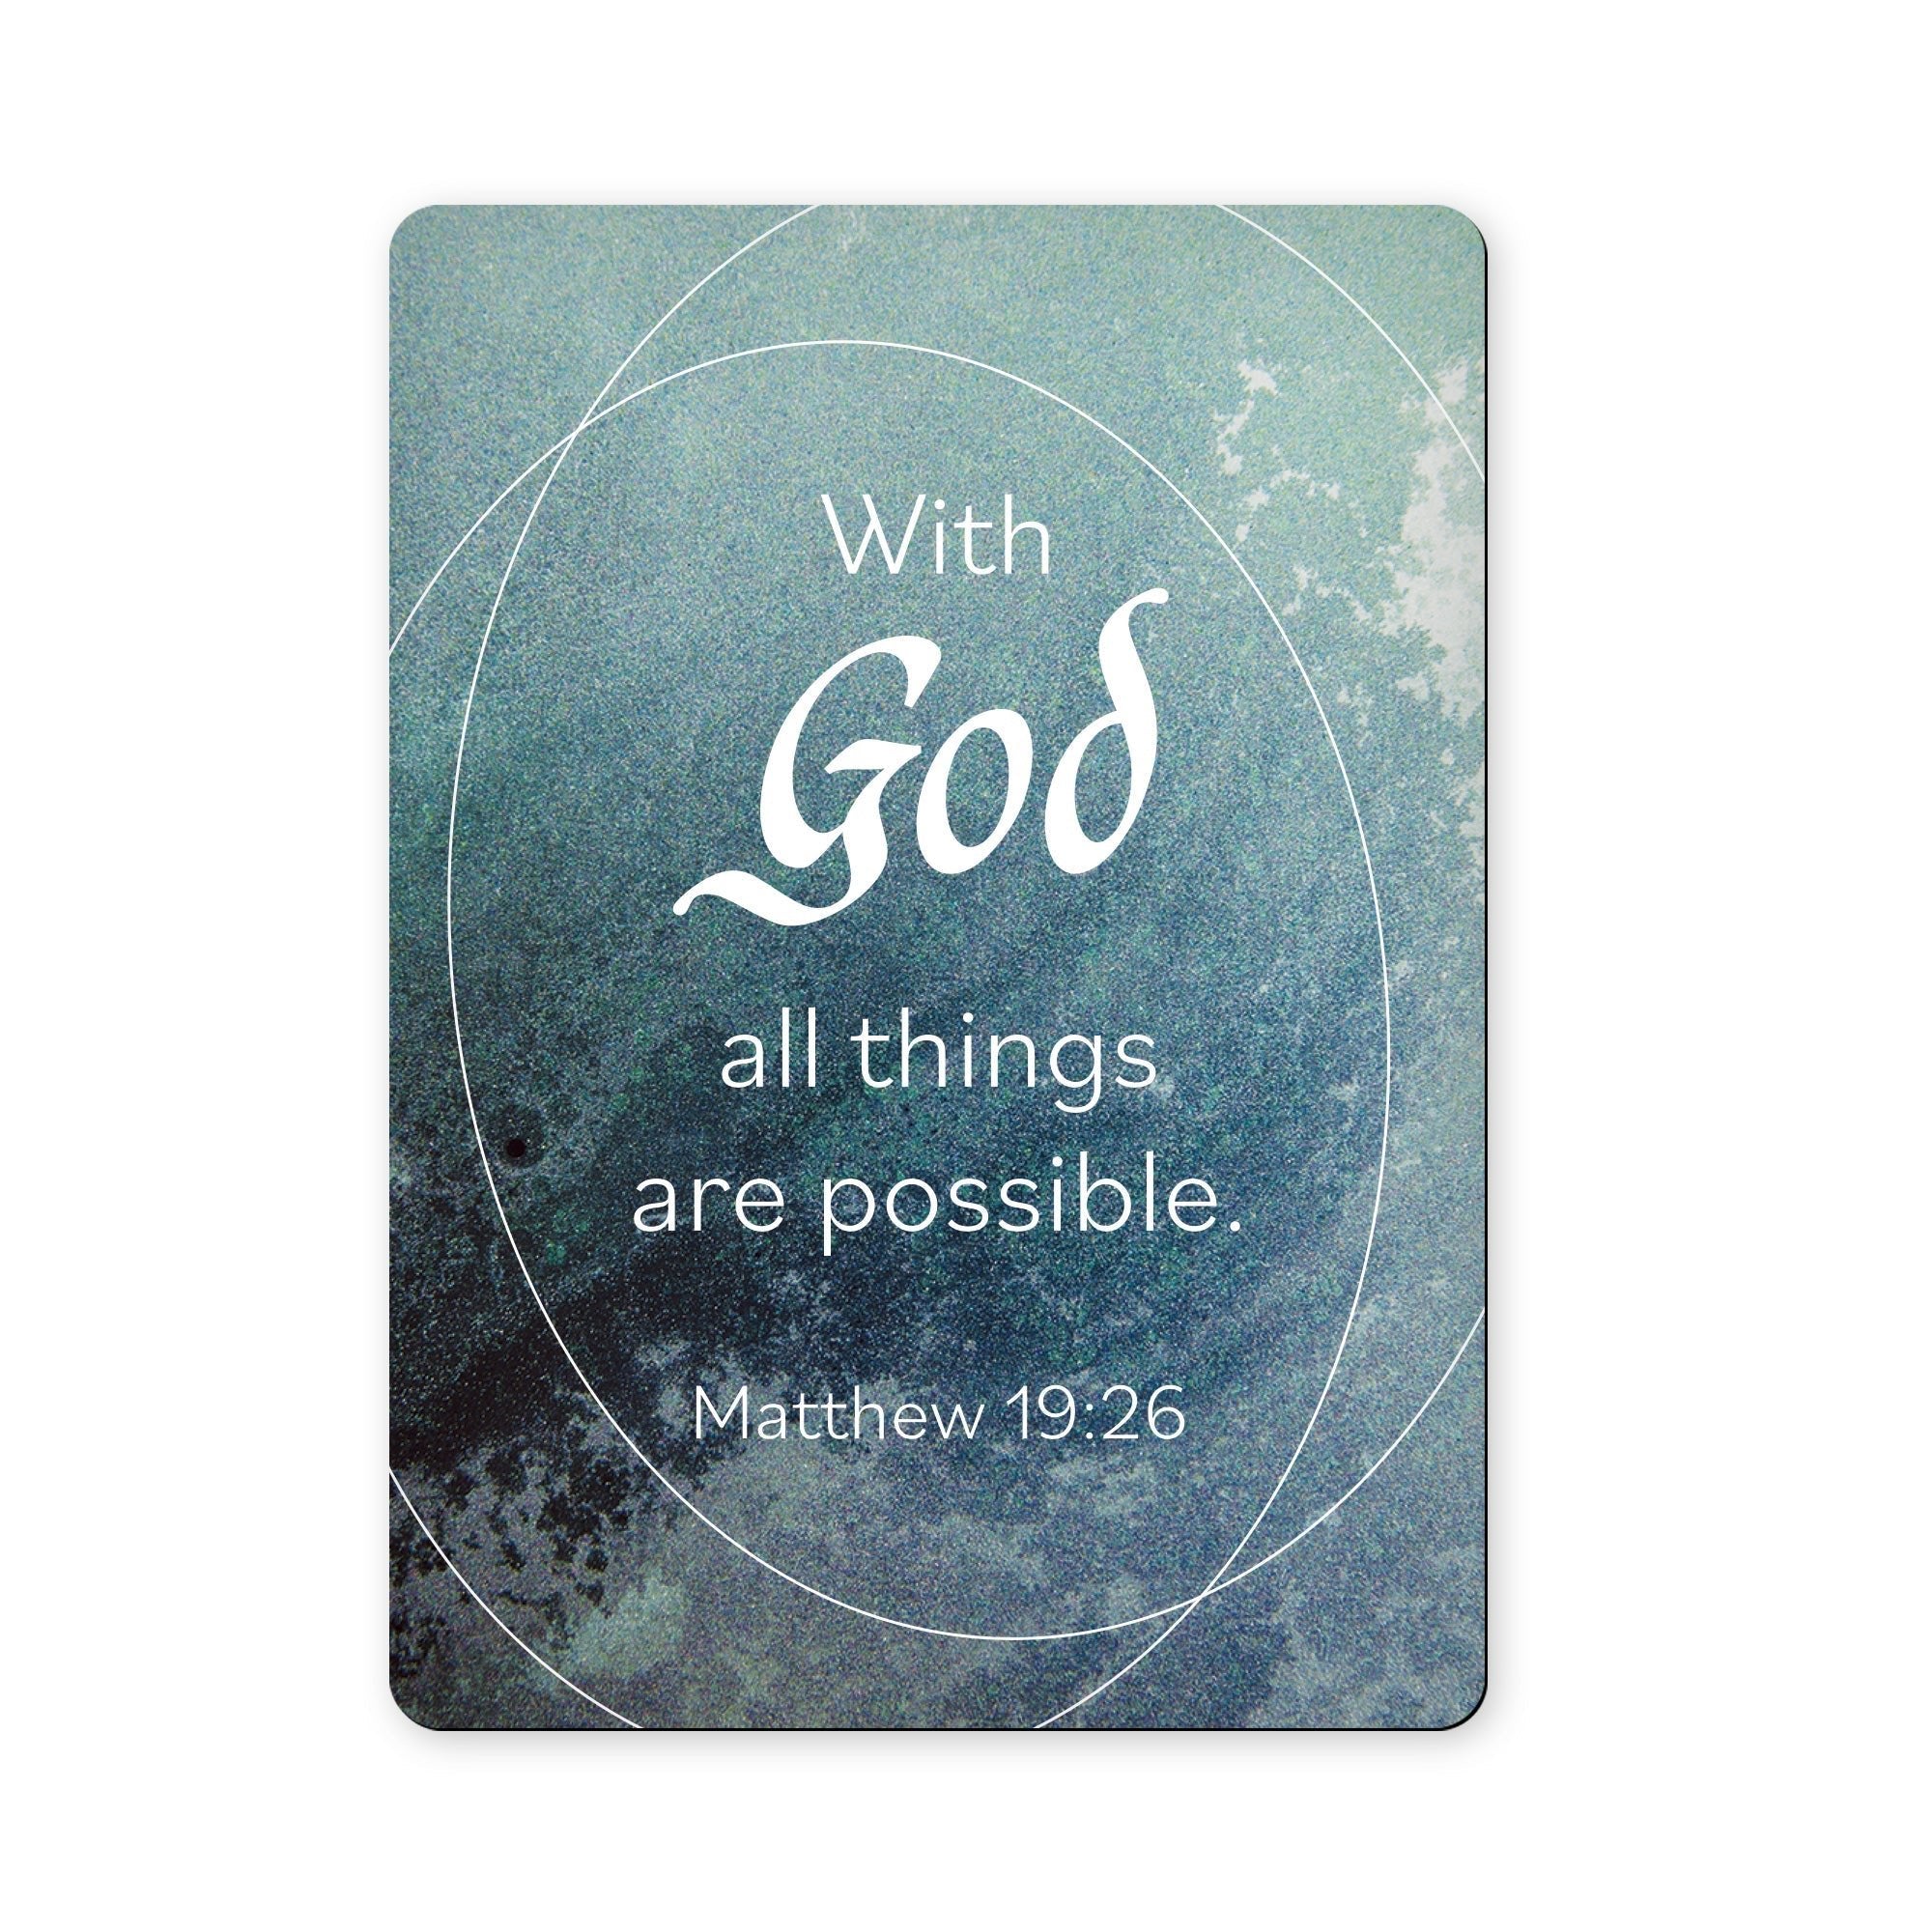 With God All Things are Possible - Matthew 19:26 - Scripture Magnet